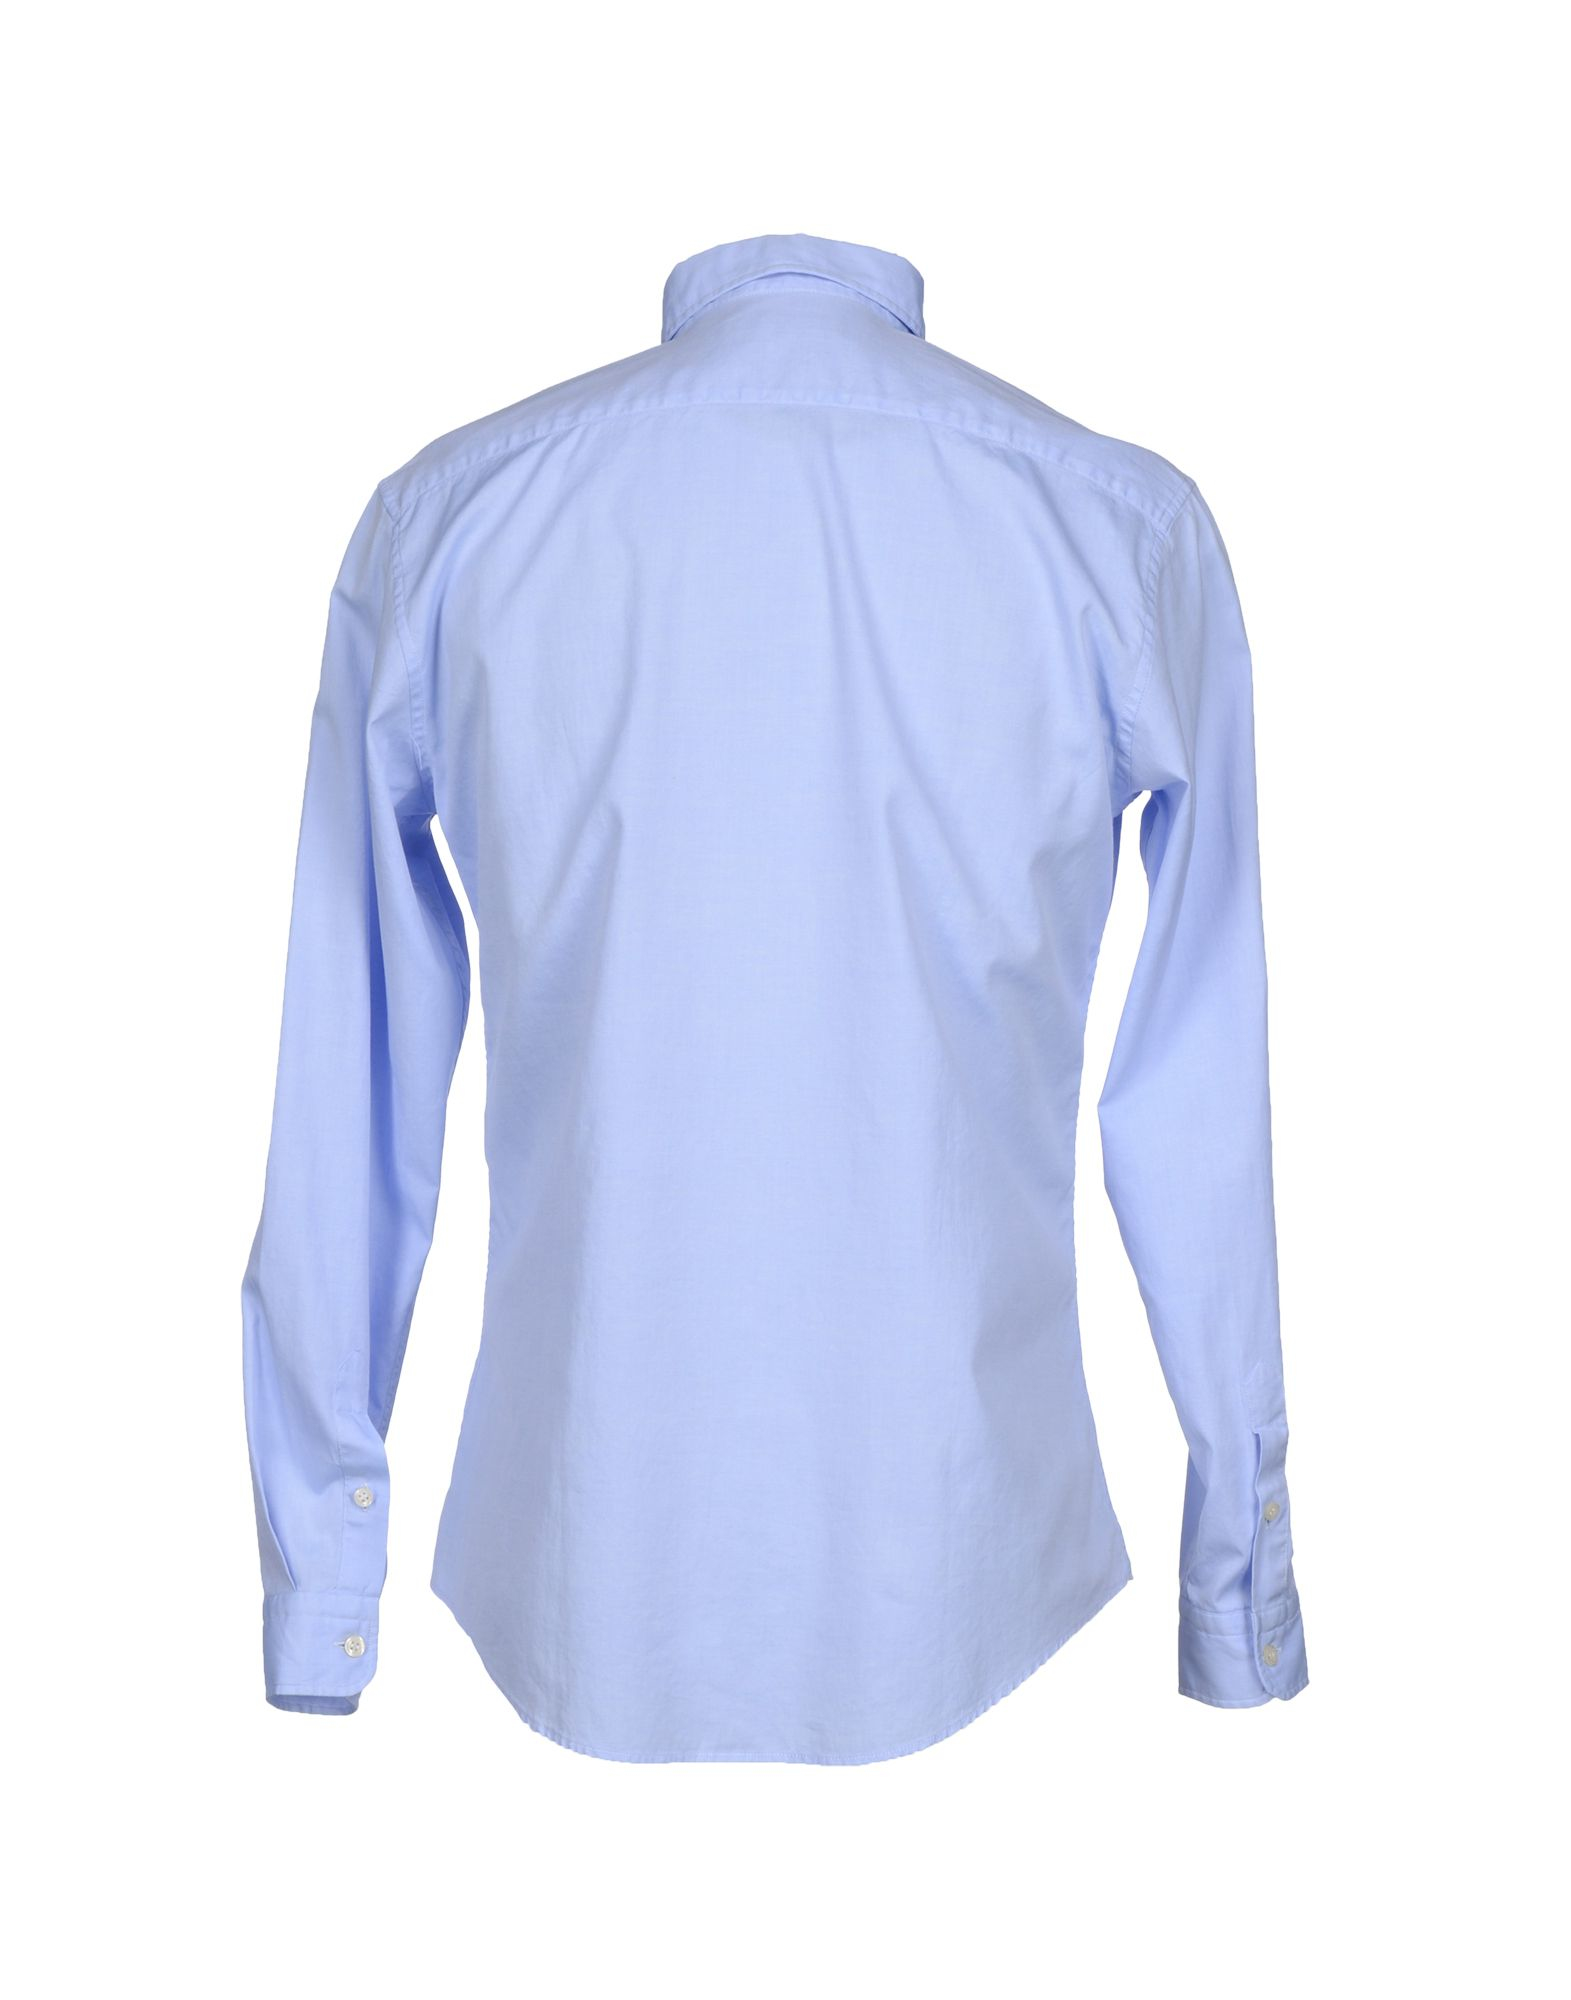 Beverly hills polo club Shirt in Blue for Men (Sky blue)